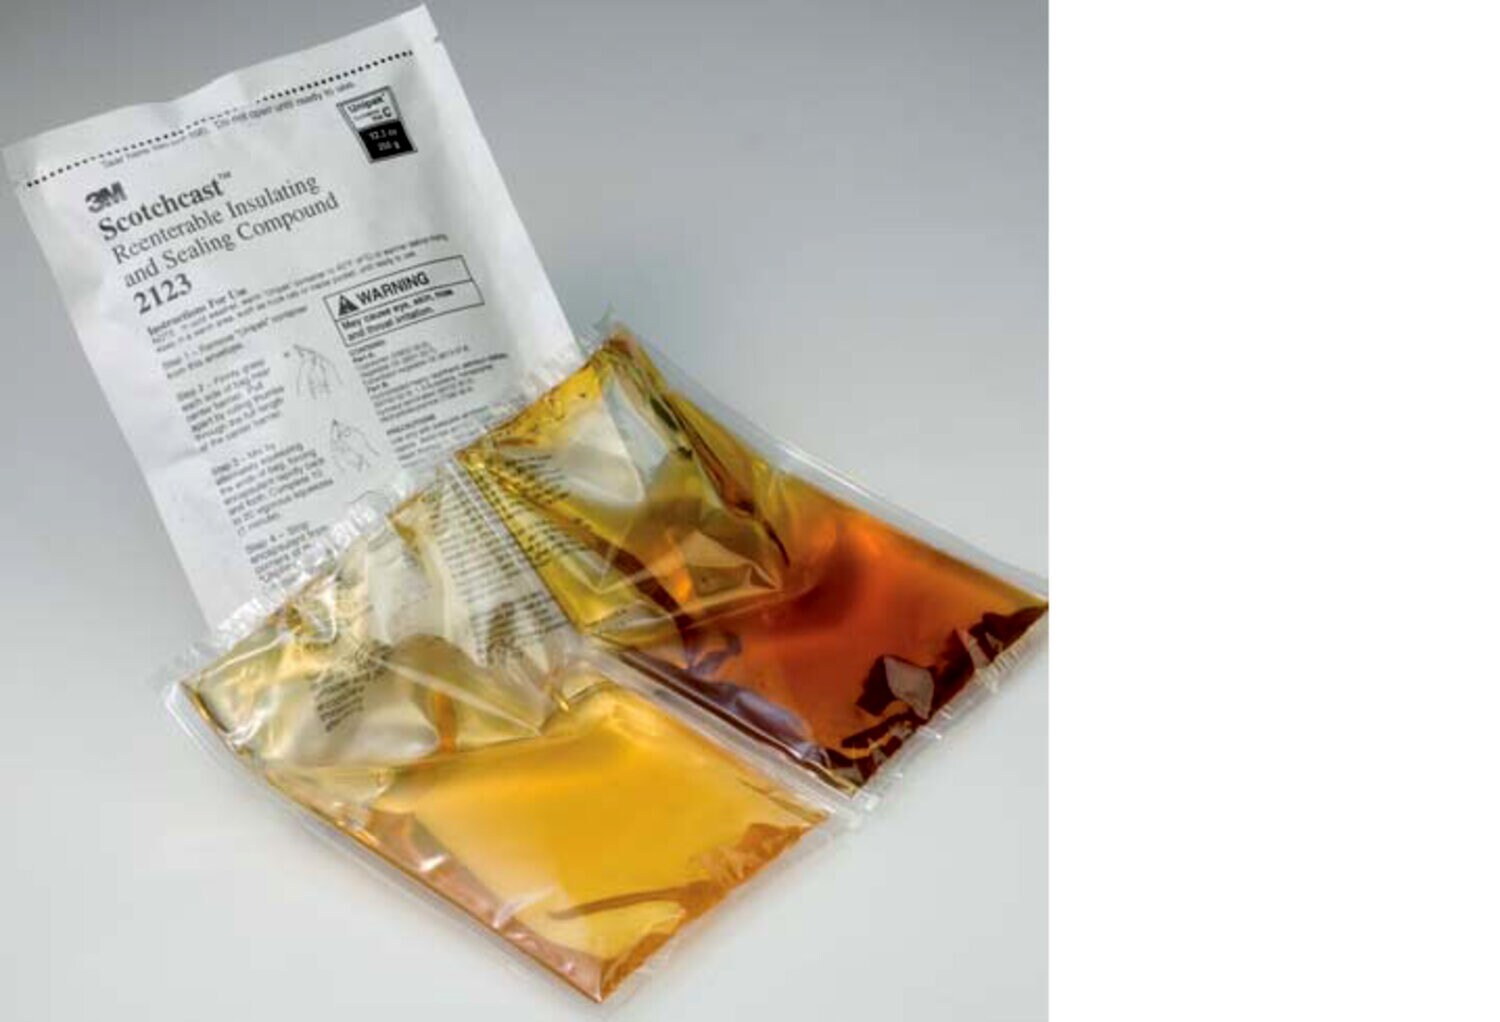 7100179833 - 3M Scotchcast Reenterable Electrical Insulating Resin 2123D (21.2 oz)
Size E, 10/Case